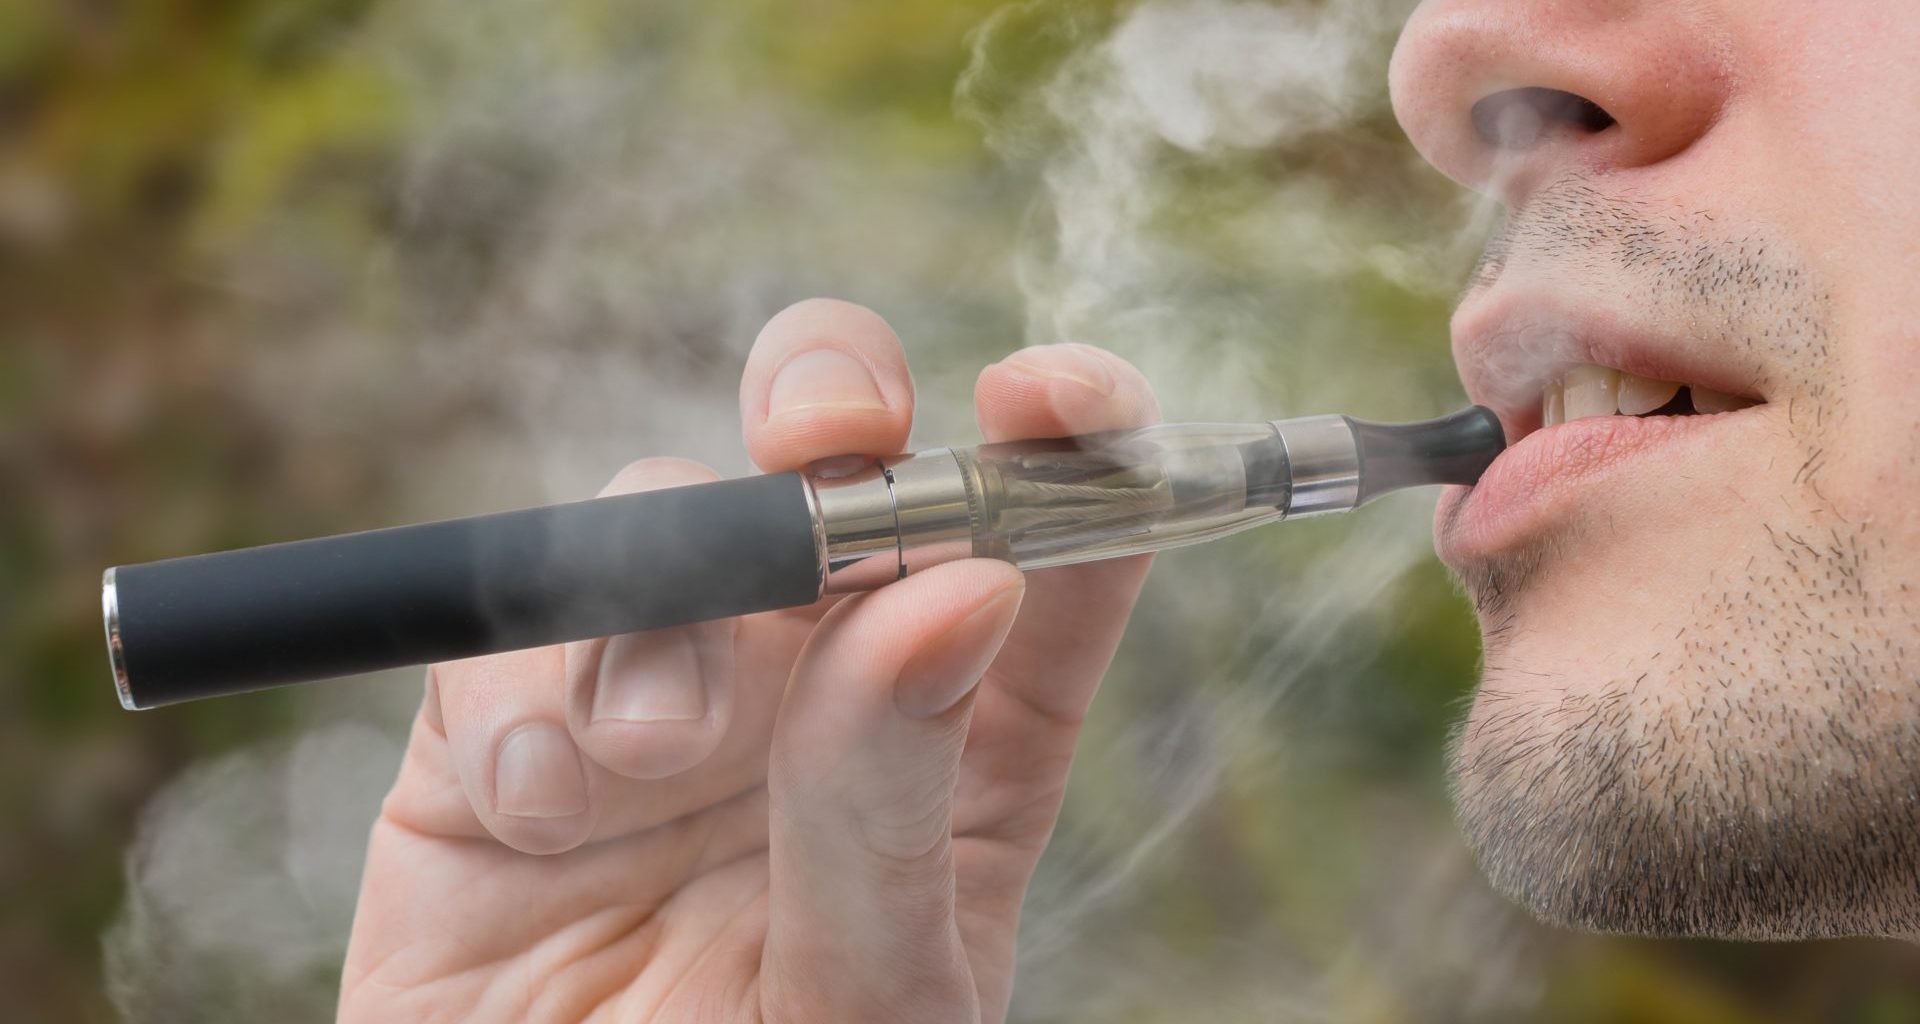 Facebook campaigns opposing anti-vaping laws prompt concern 6